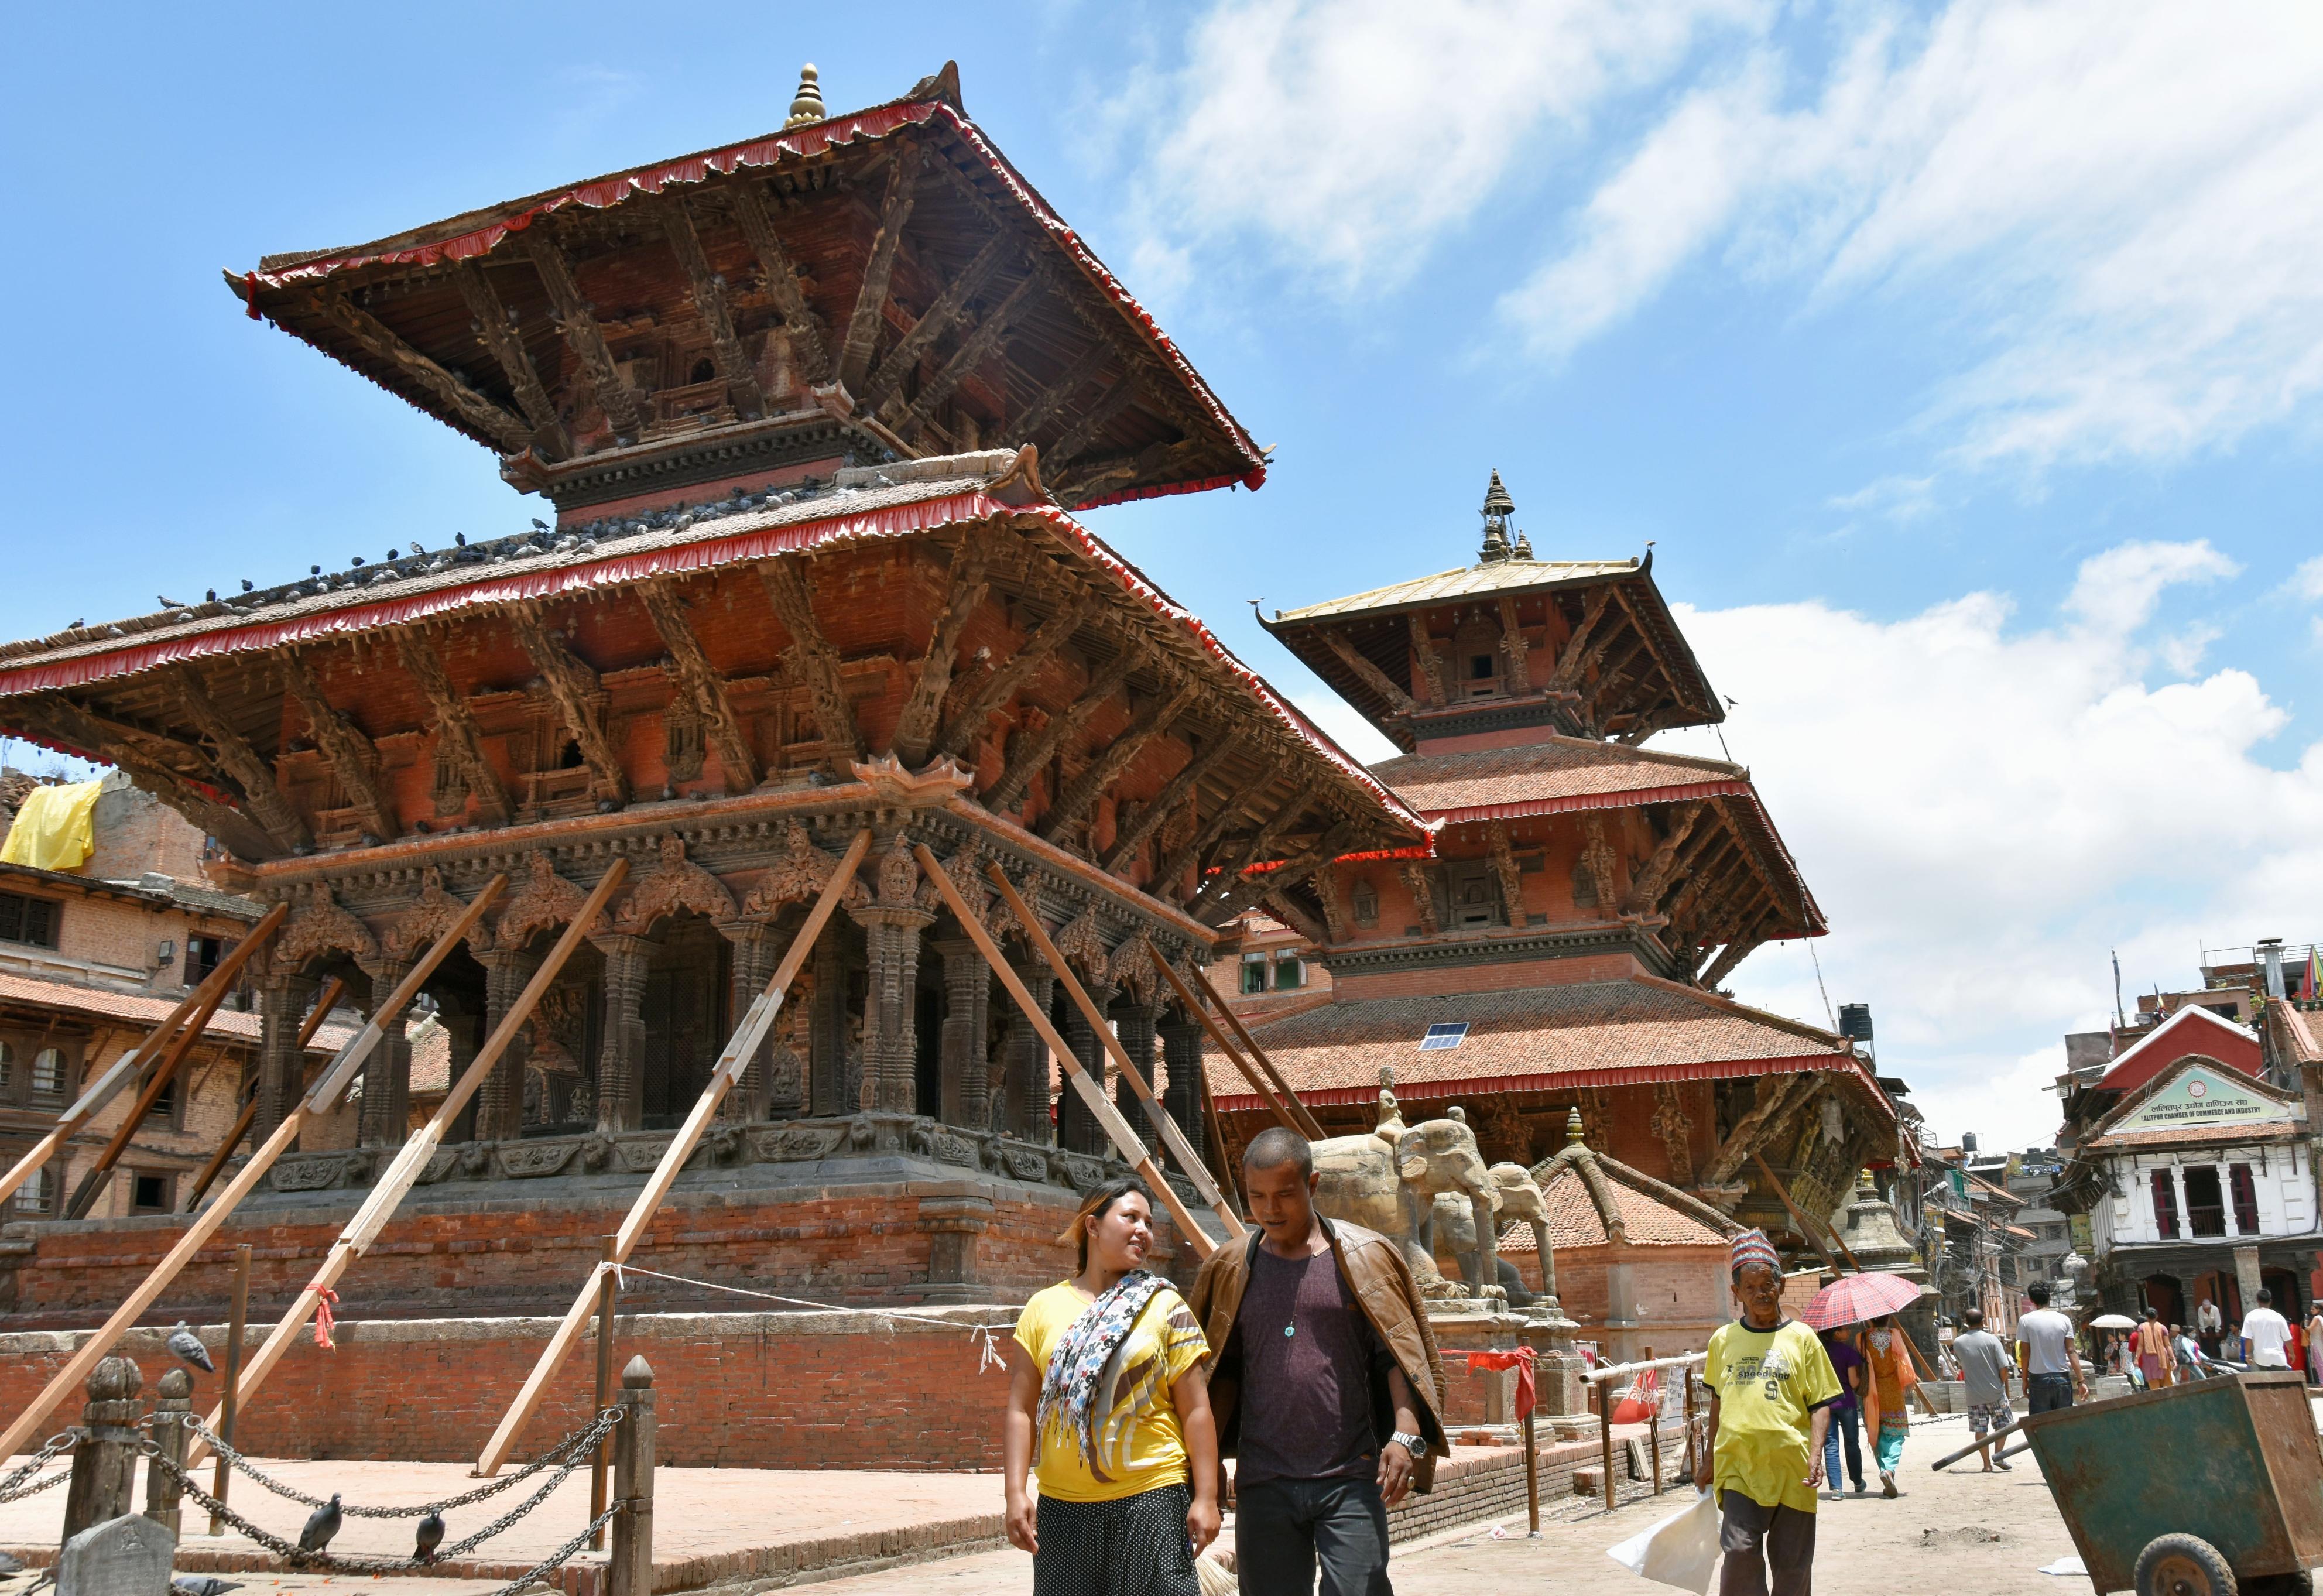 A Hindu temple is still supported by timbers at Patan Durbar Square, a UNESCO world heritage site in Kathmandu Valley in Nepal, on June 23, 2015, after it was reopened to visitors on June 15 in an attempt to bring tourism back to the region following April's devastating earthquakes. Photo: Kyodo